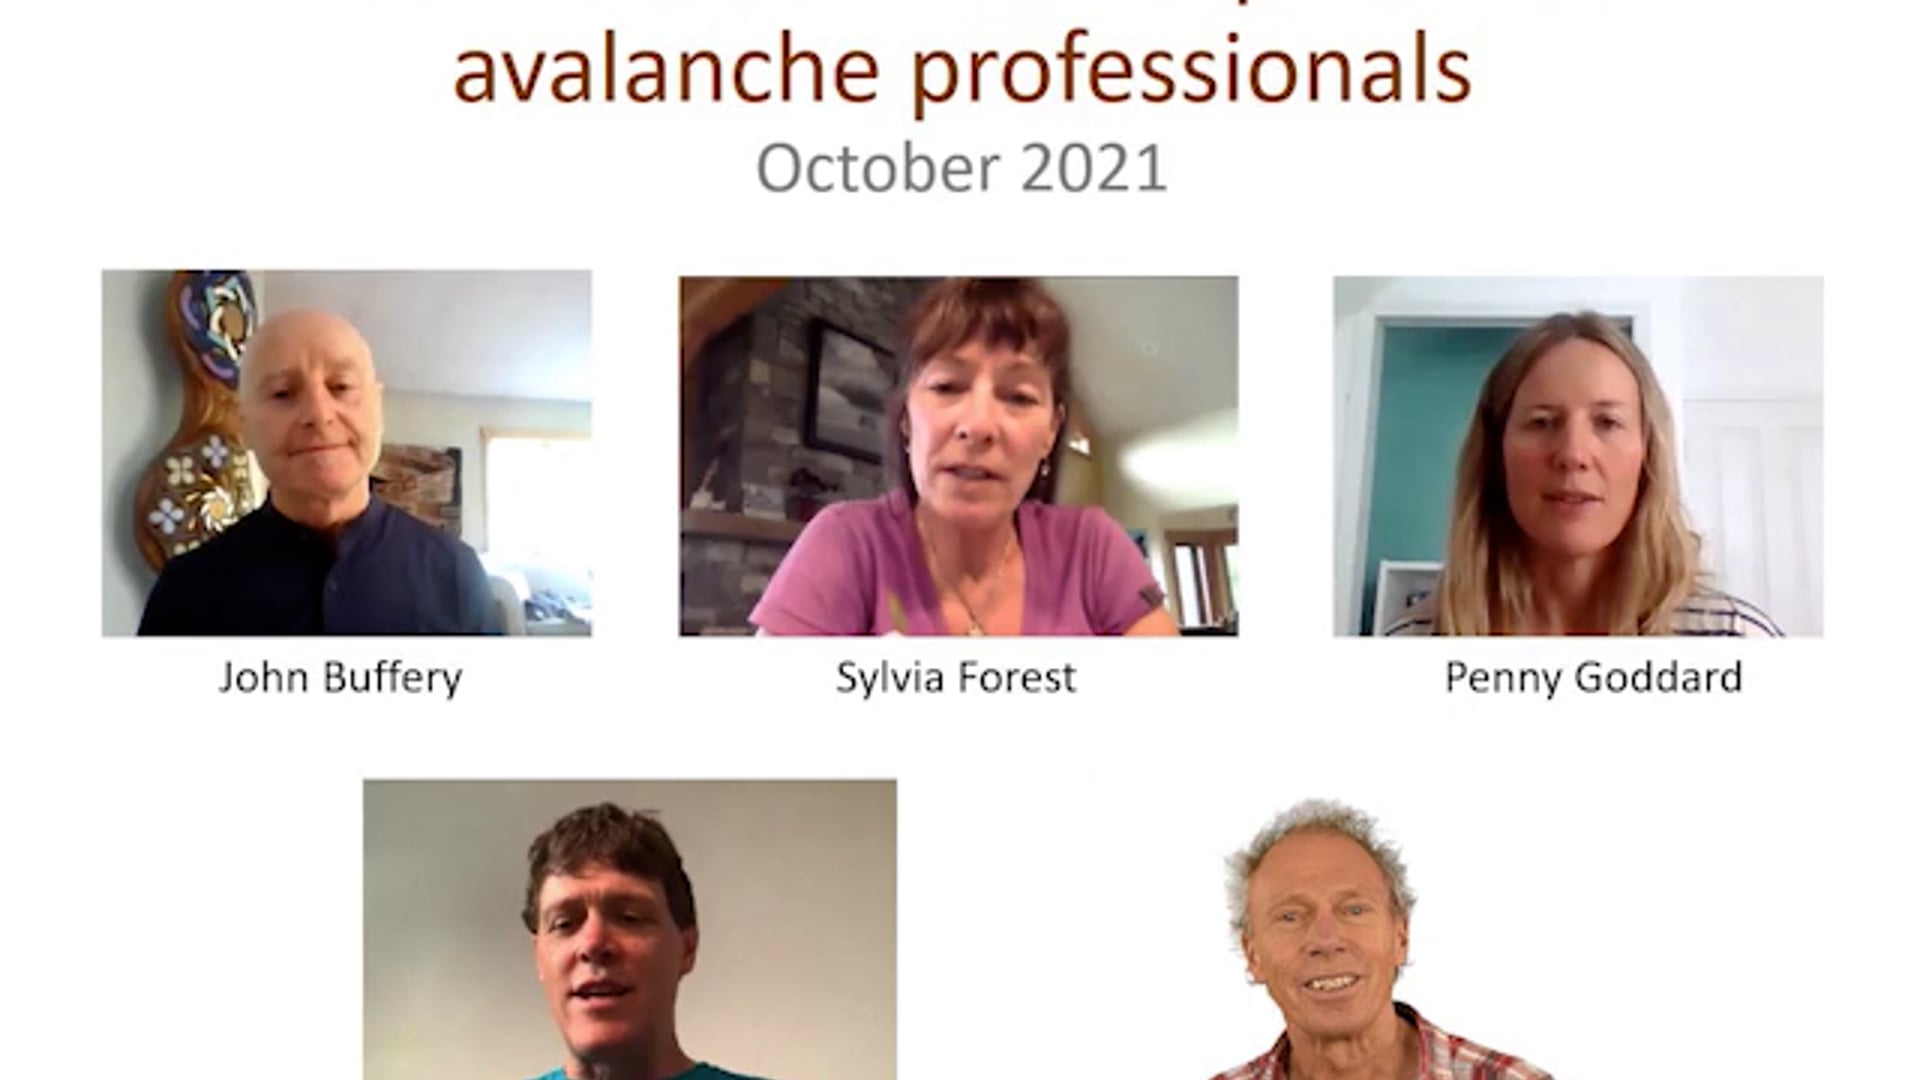 What works for five experienced avalanche professionals